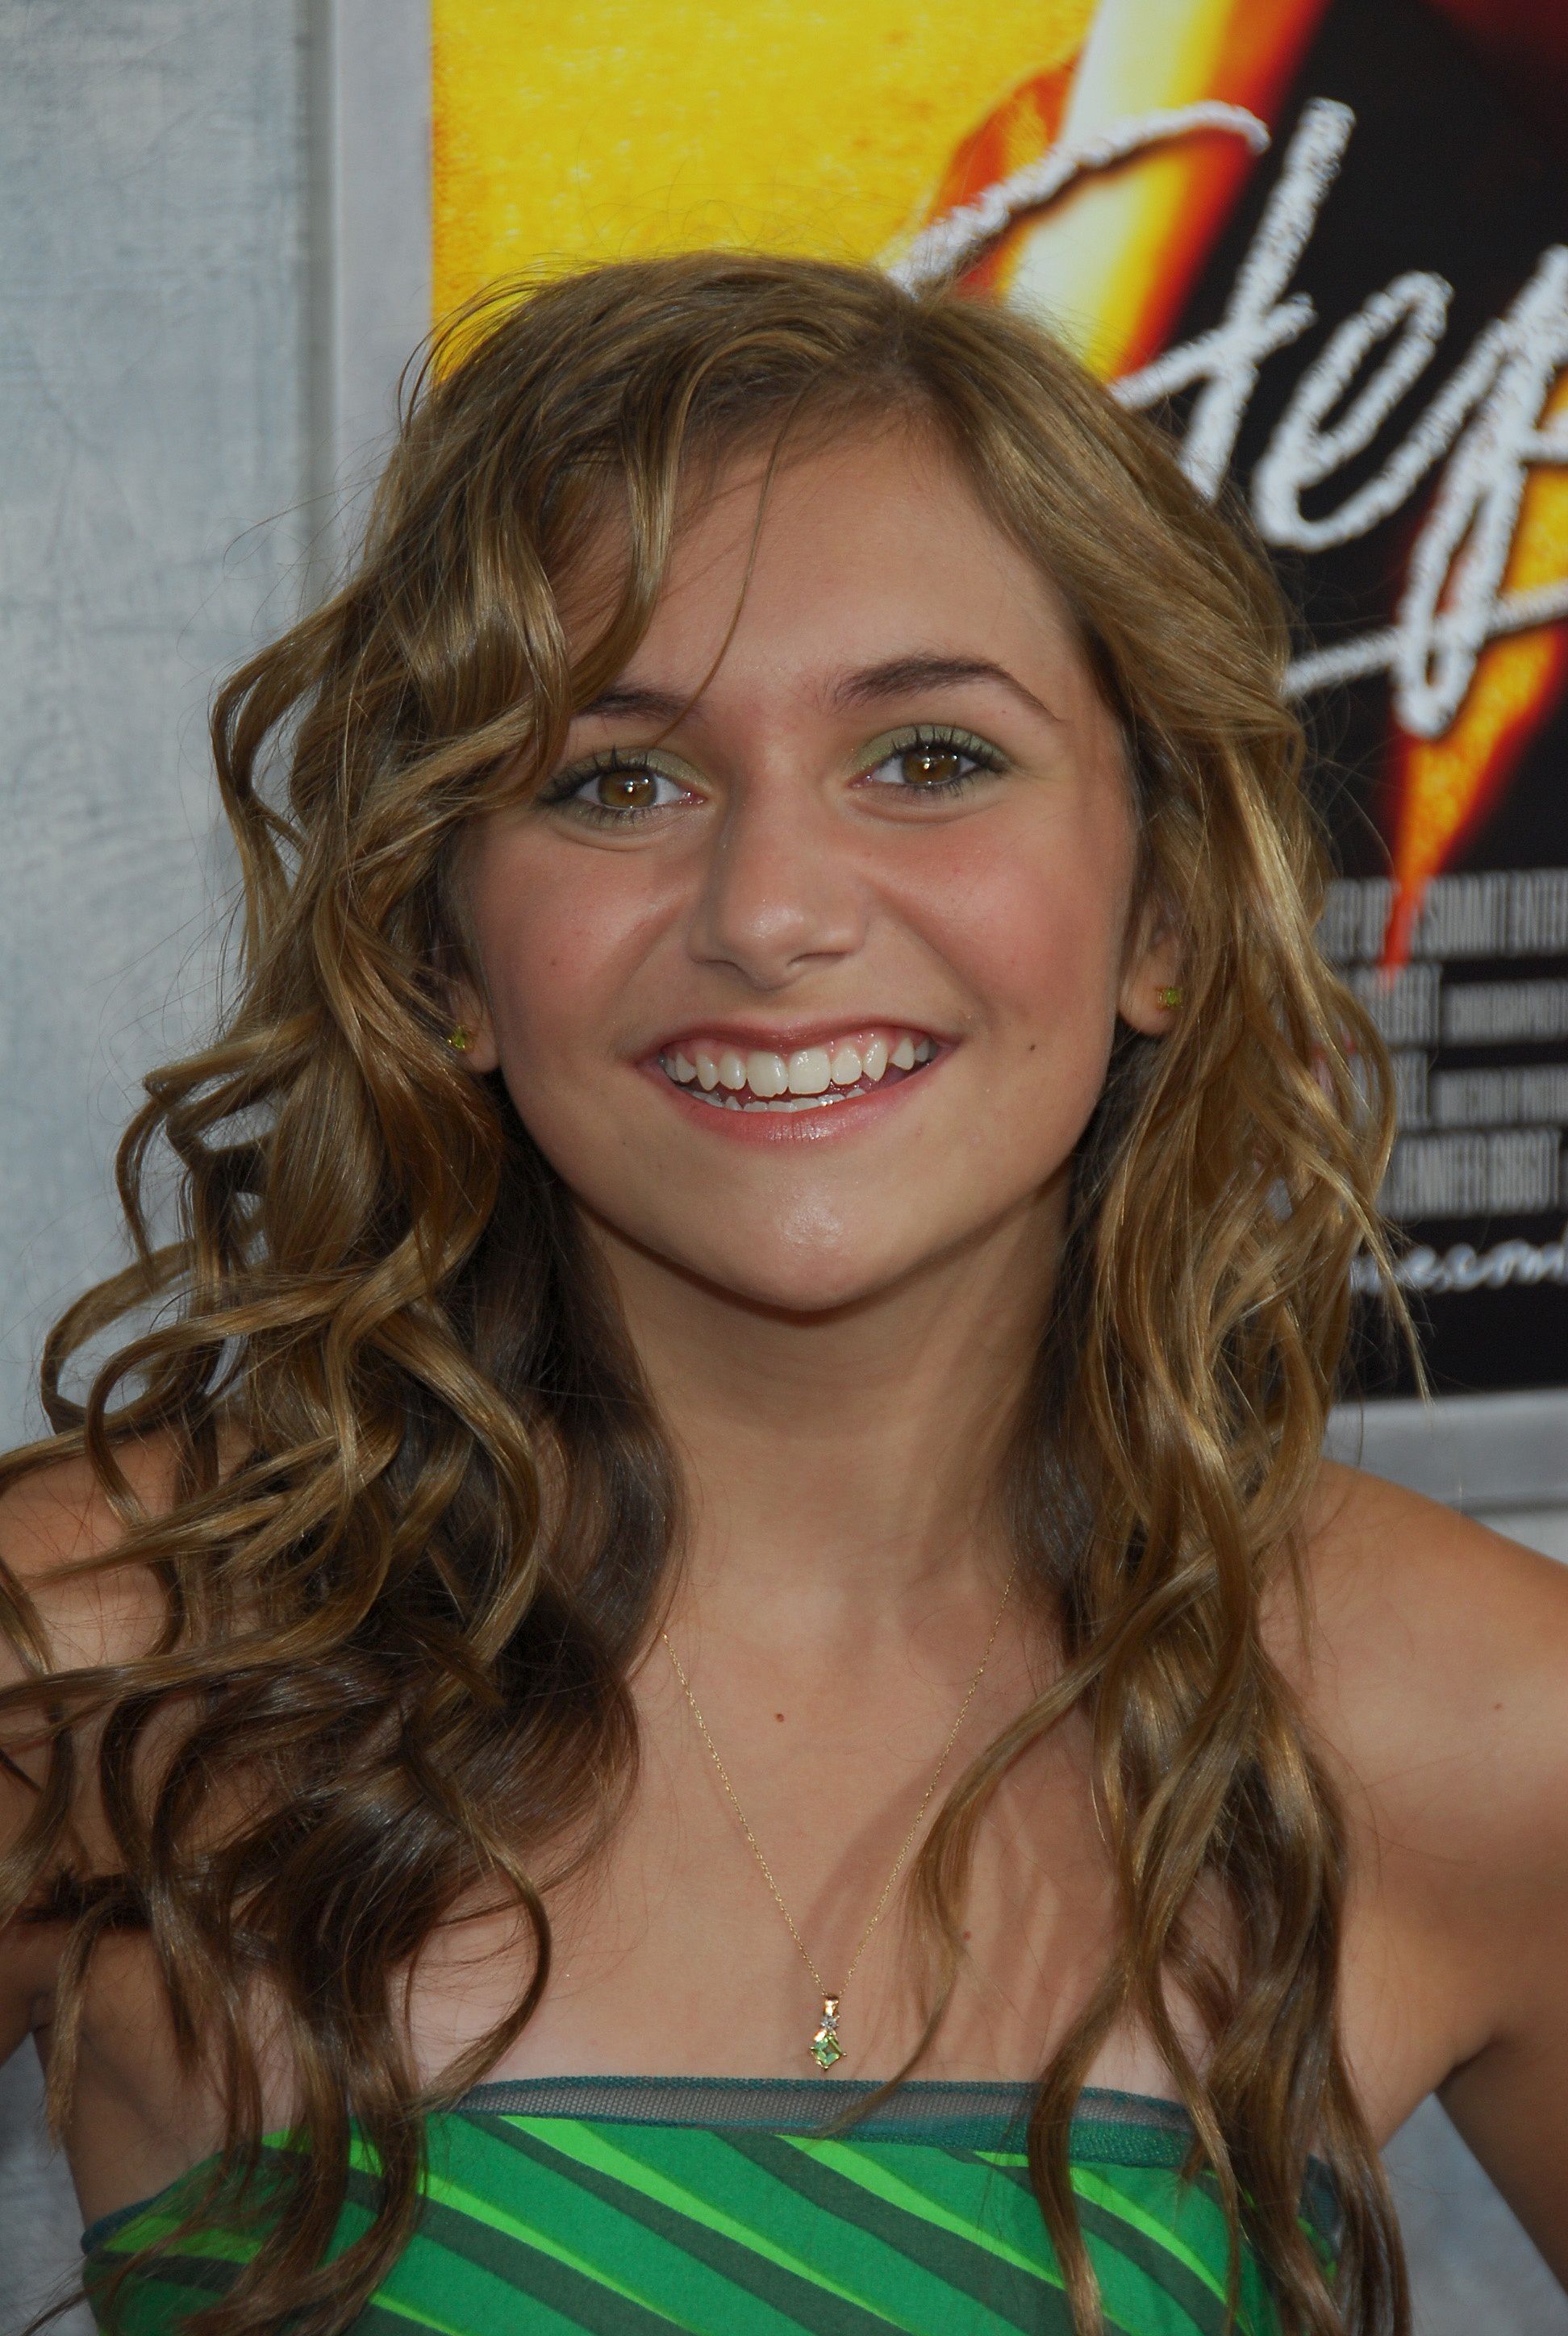 Alyson Stoner's Transformation Over the Years in Photos | J-14